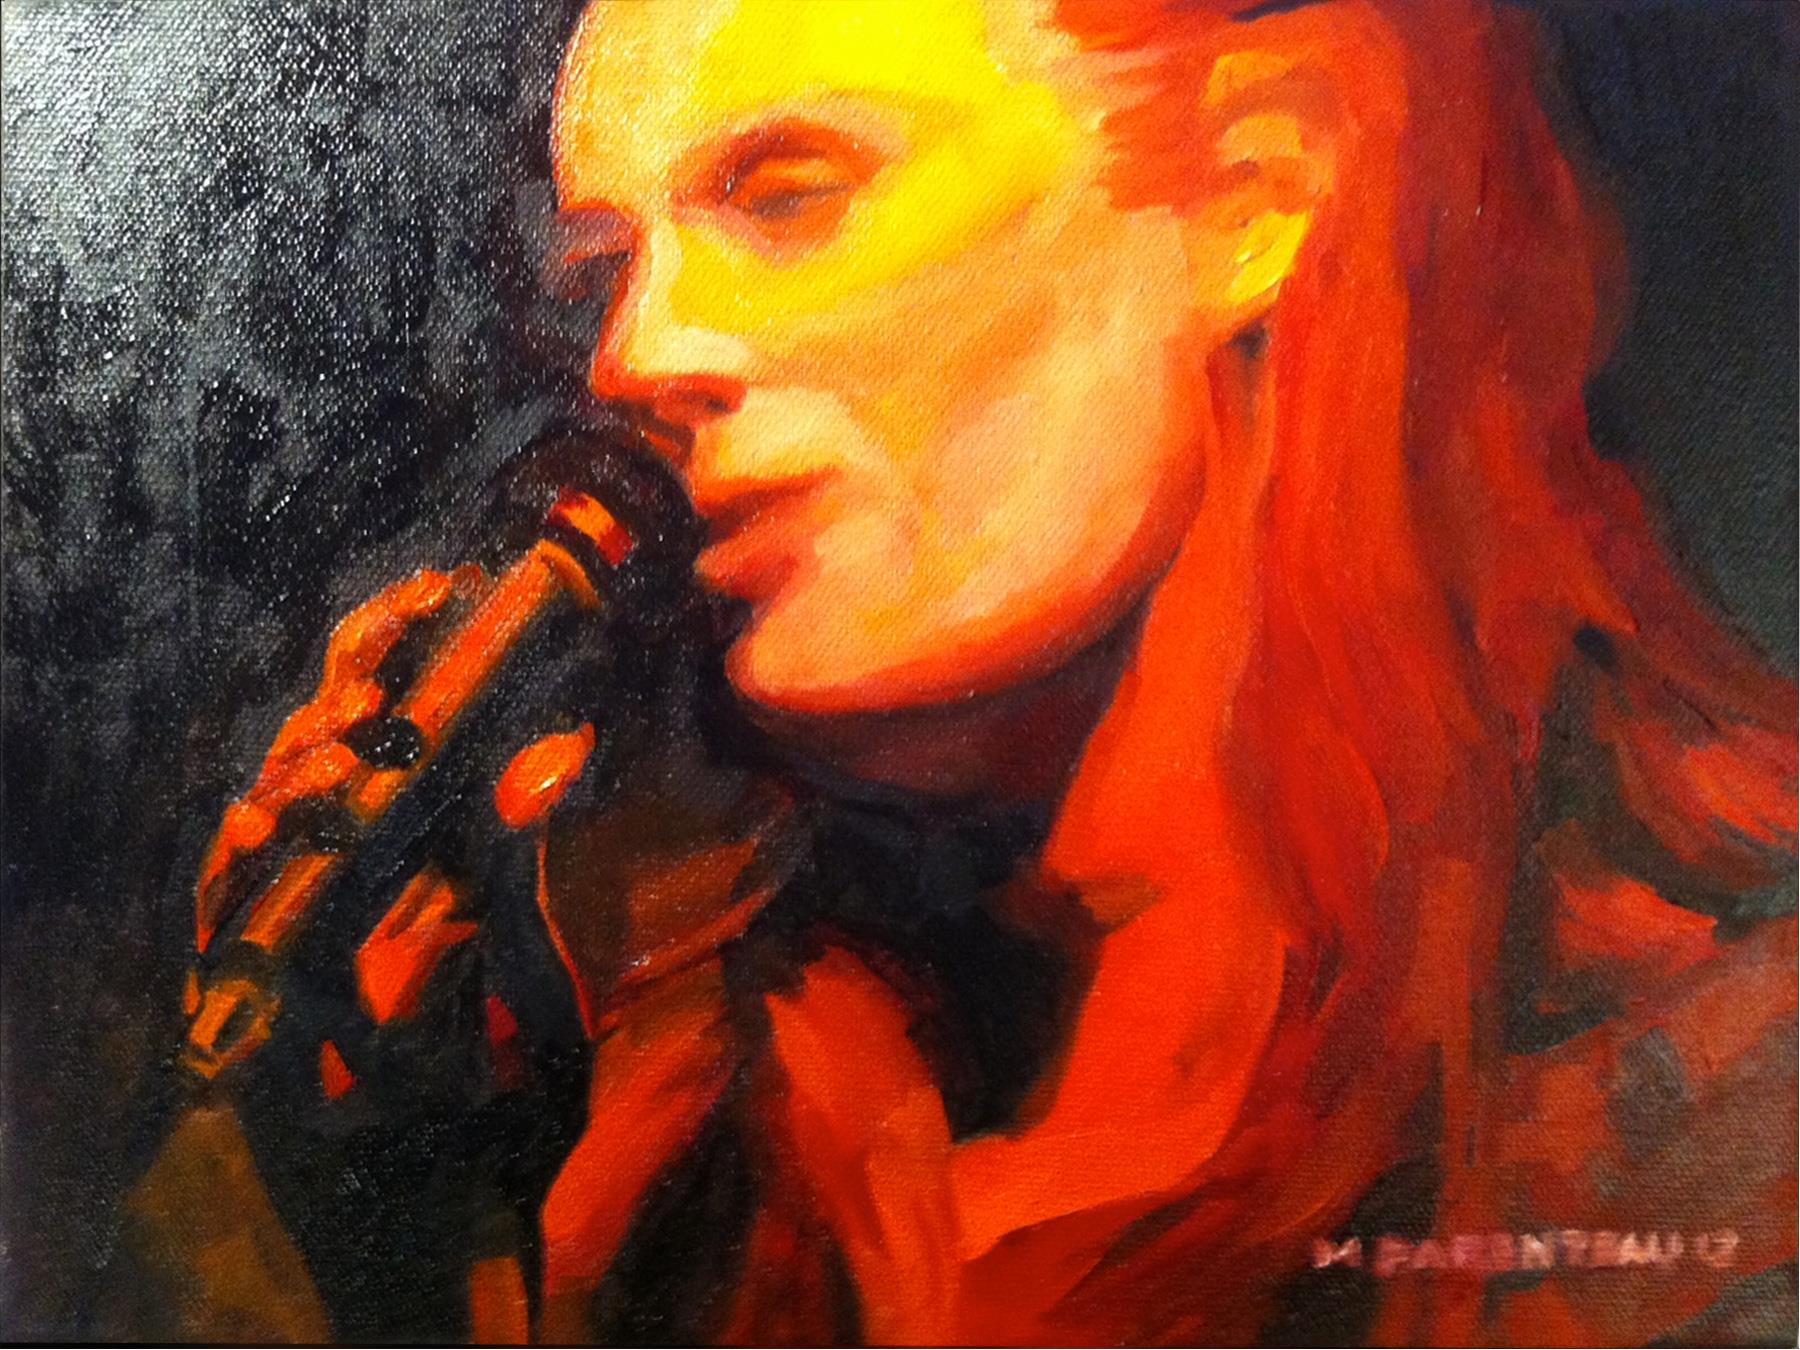 Singer on Fire 12 x 9 OIl on Canvas